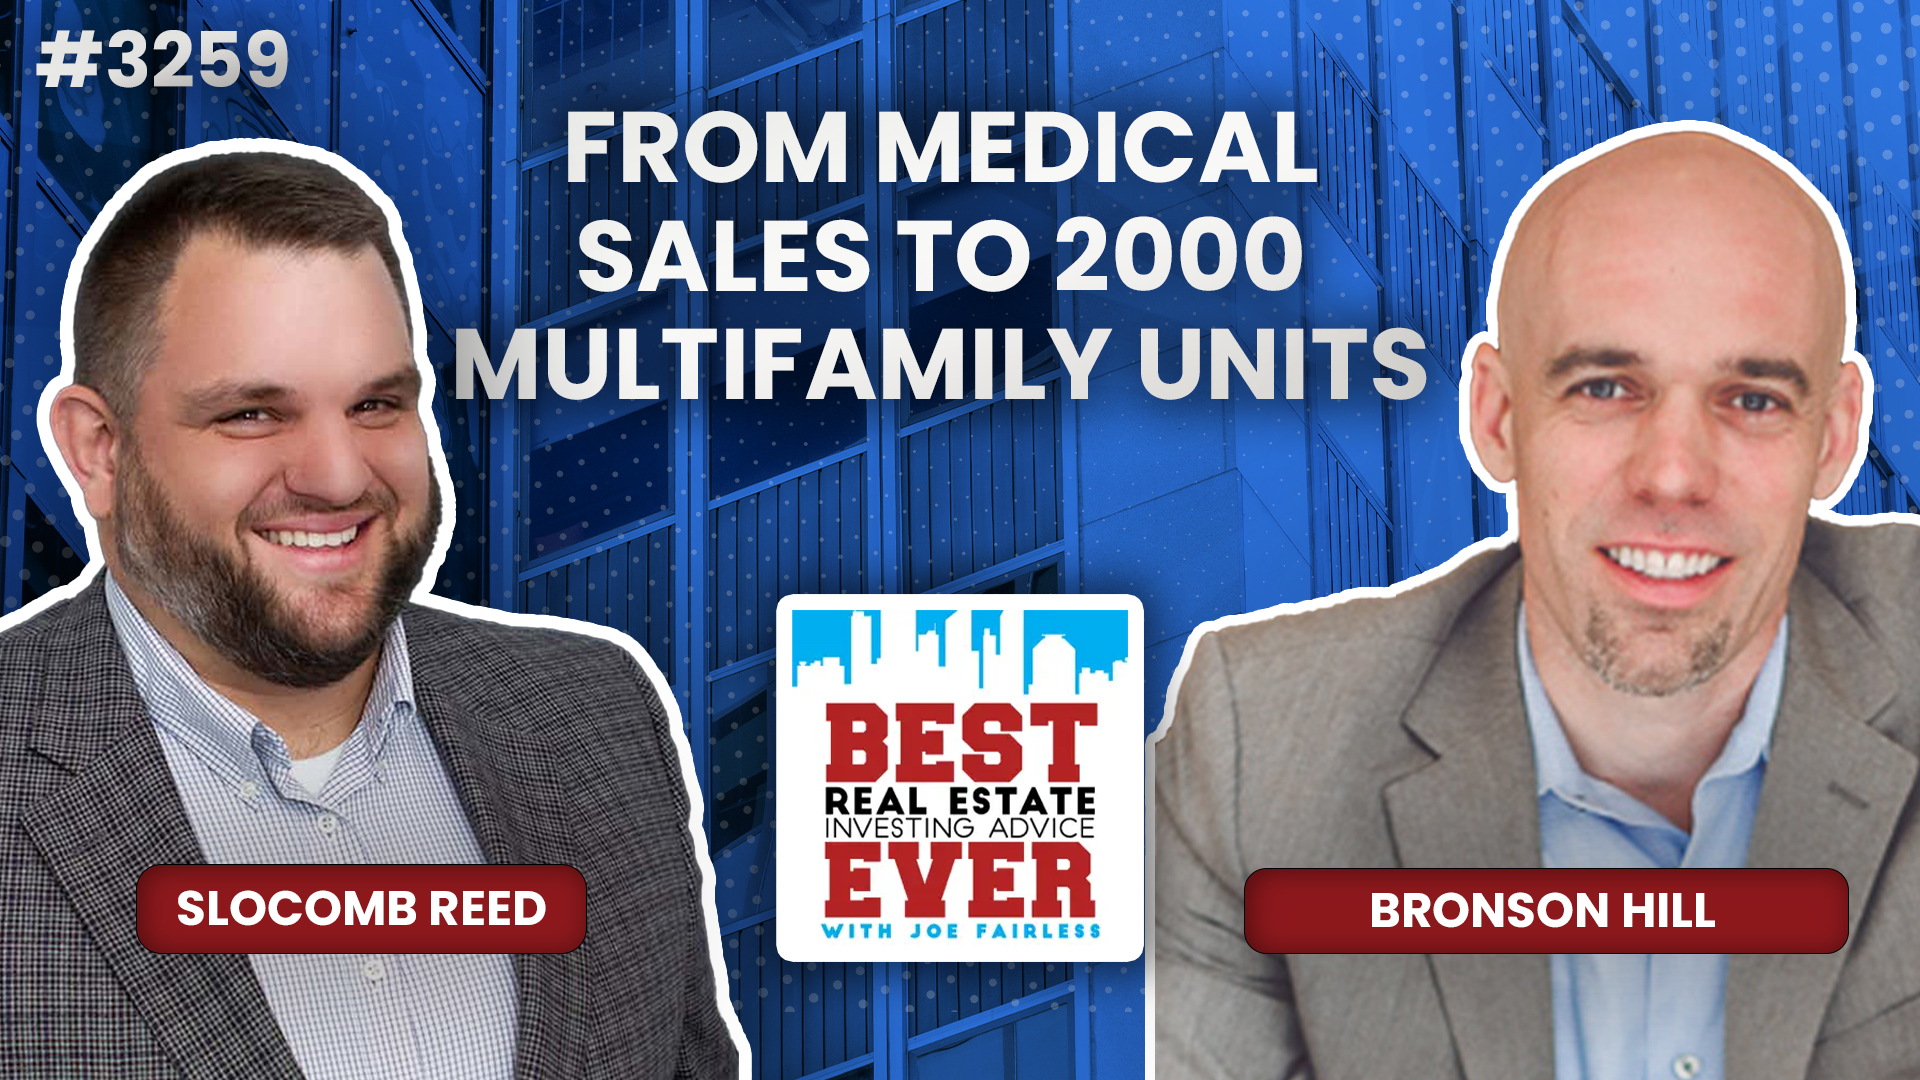 JF3259: Bronson Hill — From Medical Sales to 2000 Multifamily Units